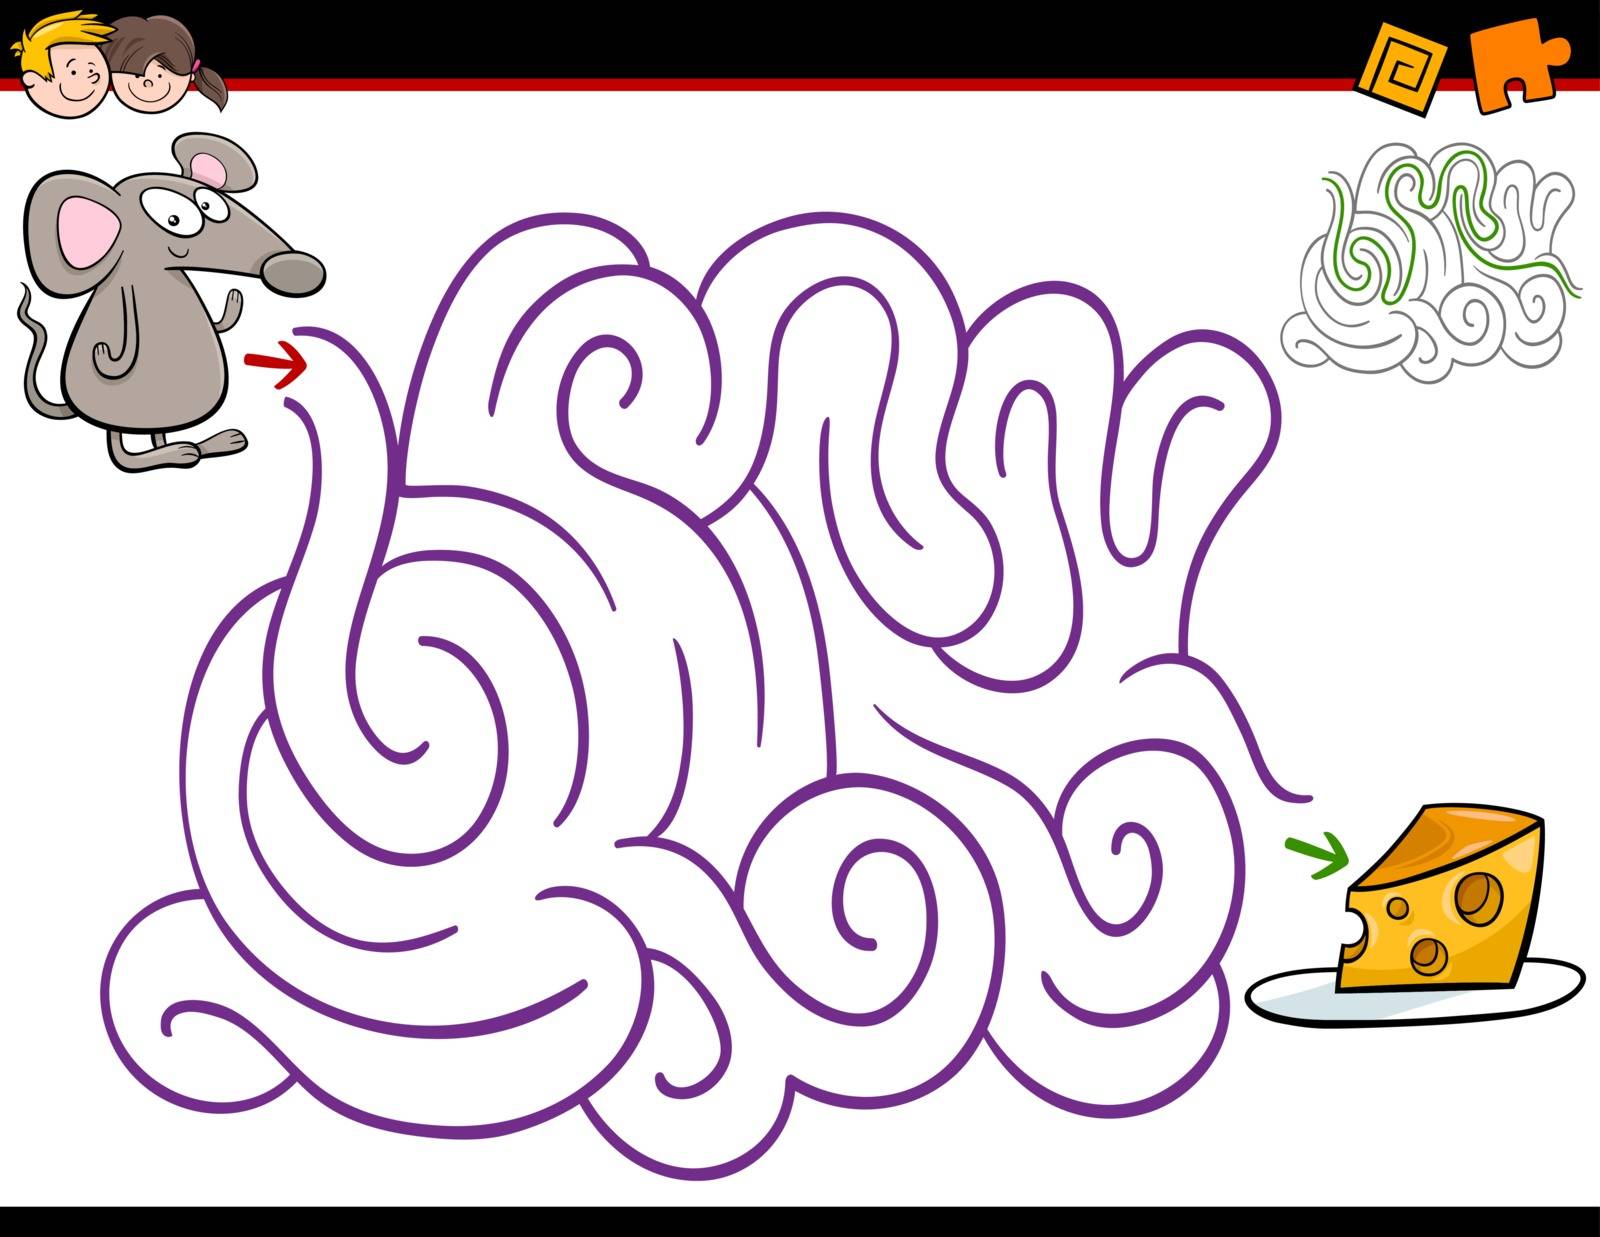 Cartoon Illustration of Education Maze or Labyrinth Activity Game for Children with Mouse and Cheese